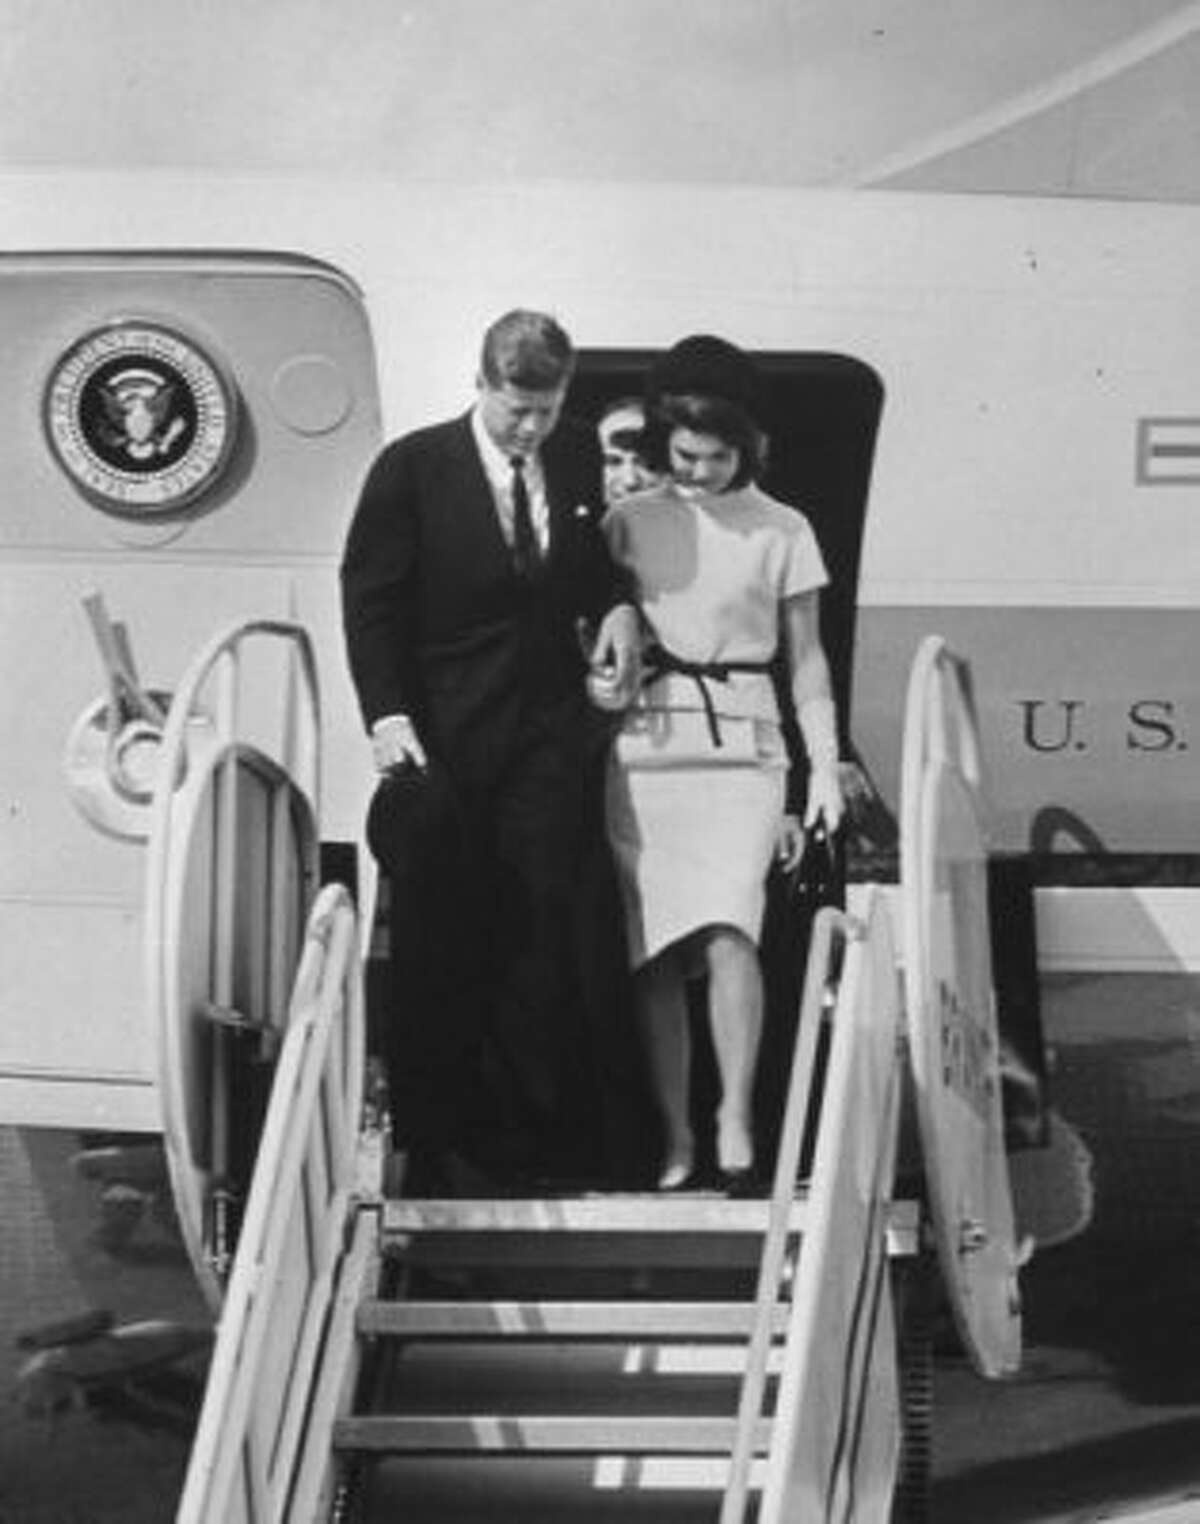 President John F. Kennedy & wife Jacqueline Kennedy arriving at the airport in San Antonio, Texas, November 21, 1963. (Time & Life Pictures/Getty Image)